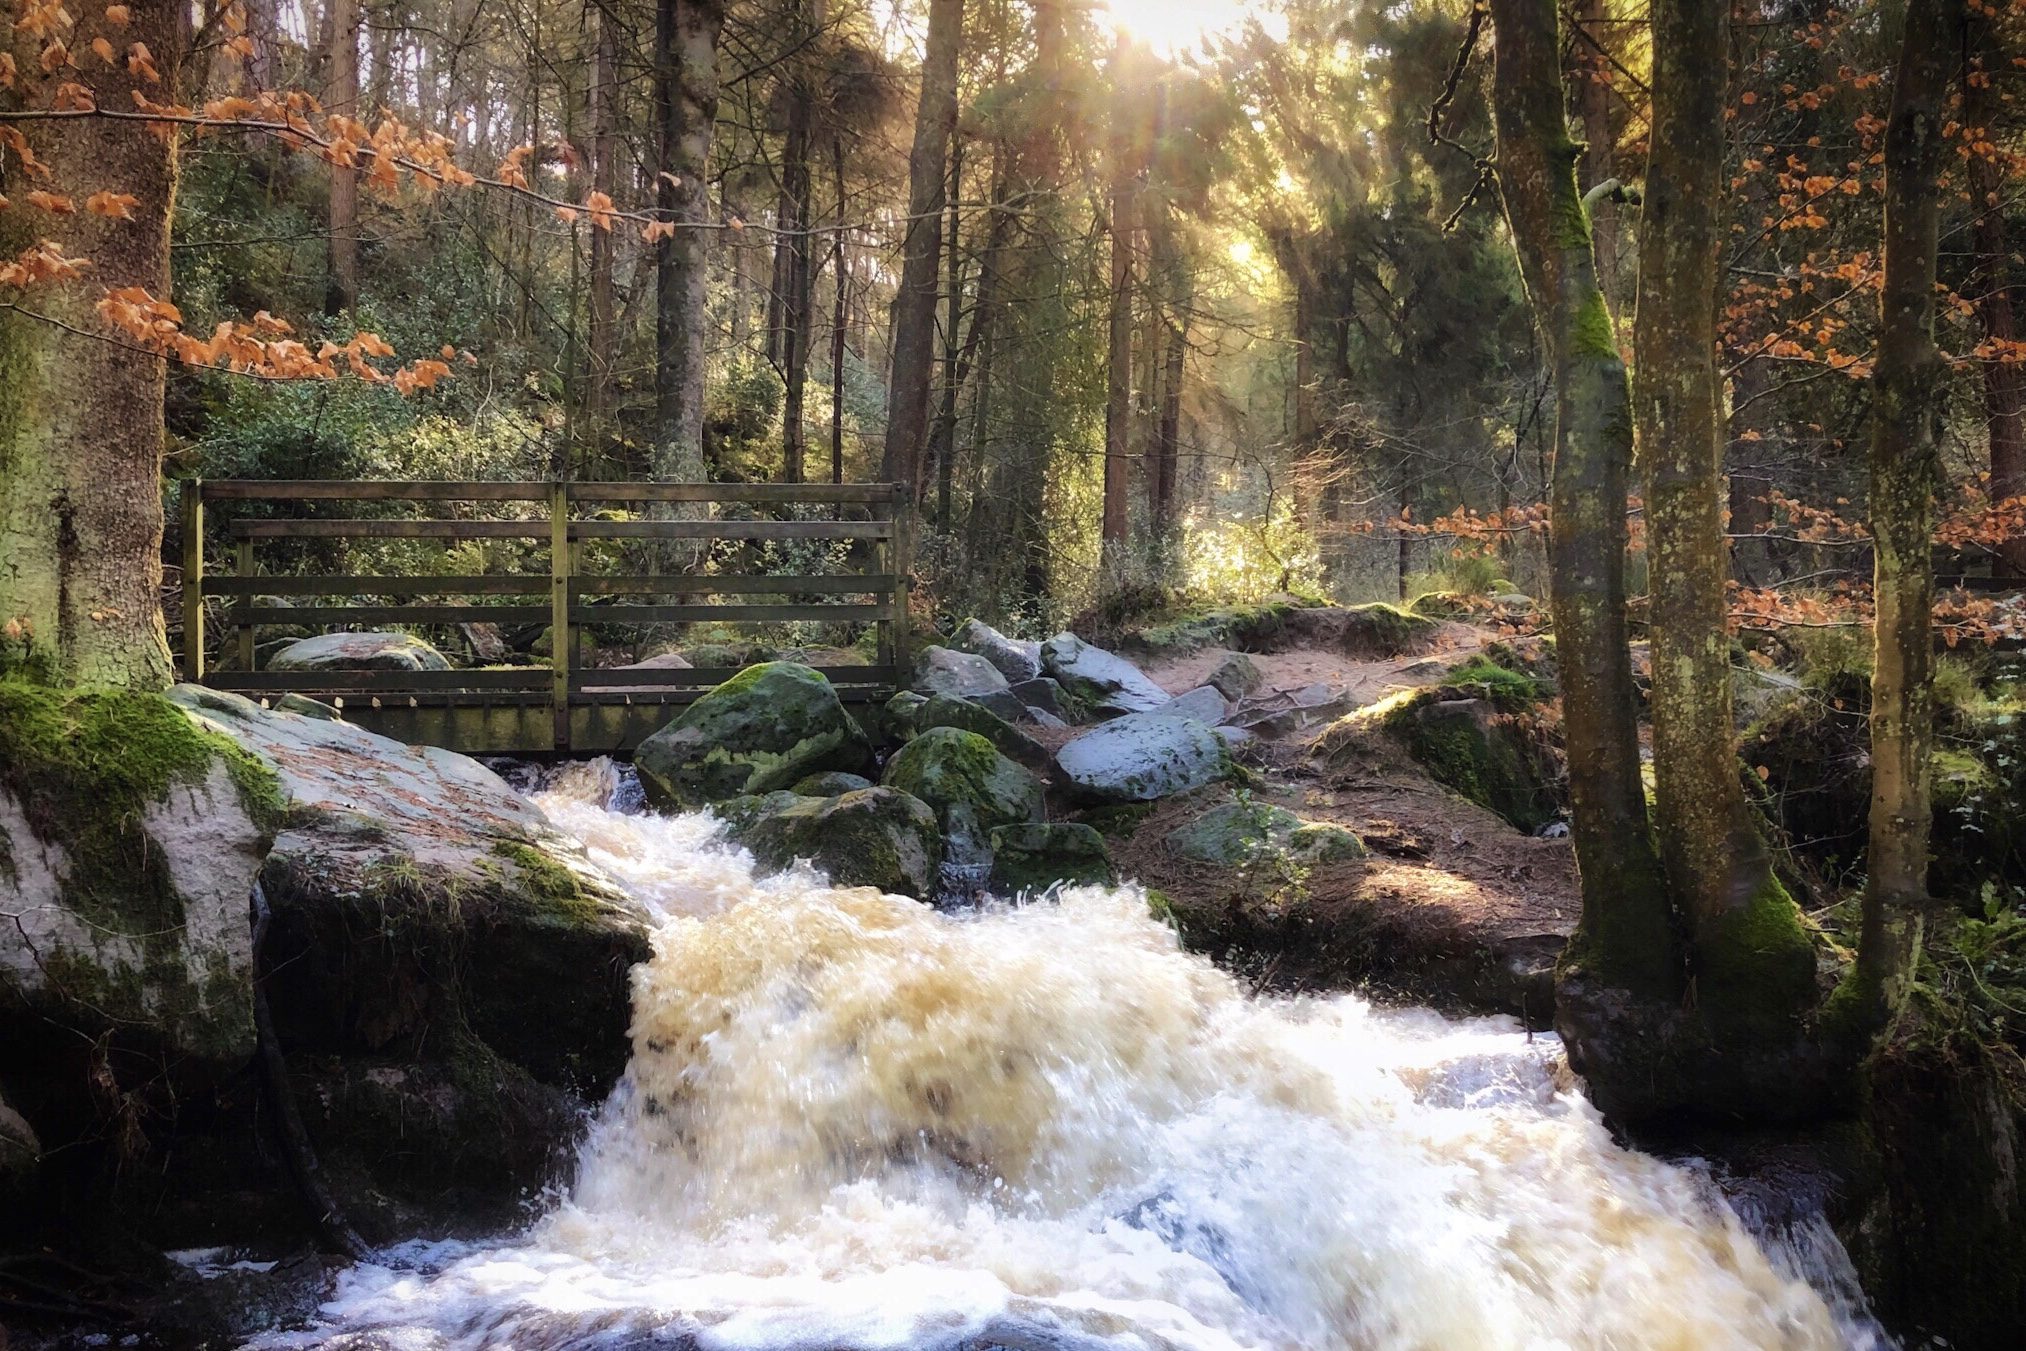 70 Best Days Out in the Peak District: Wyming Brook 1